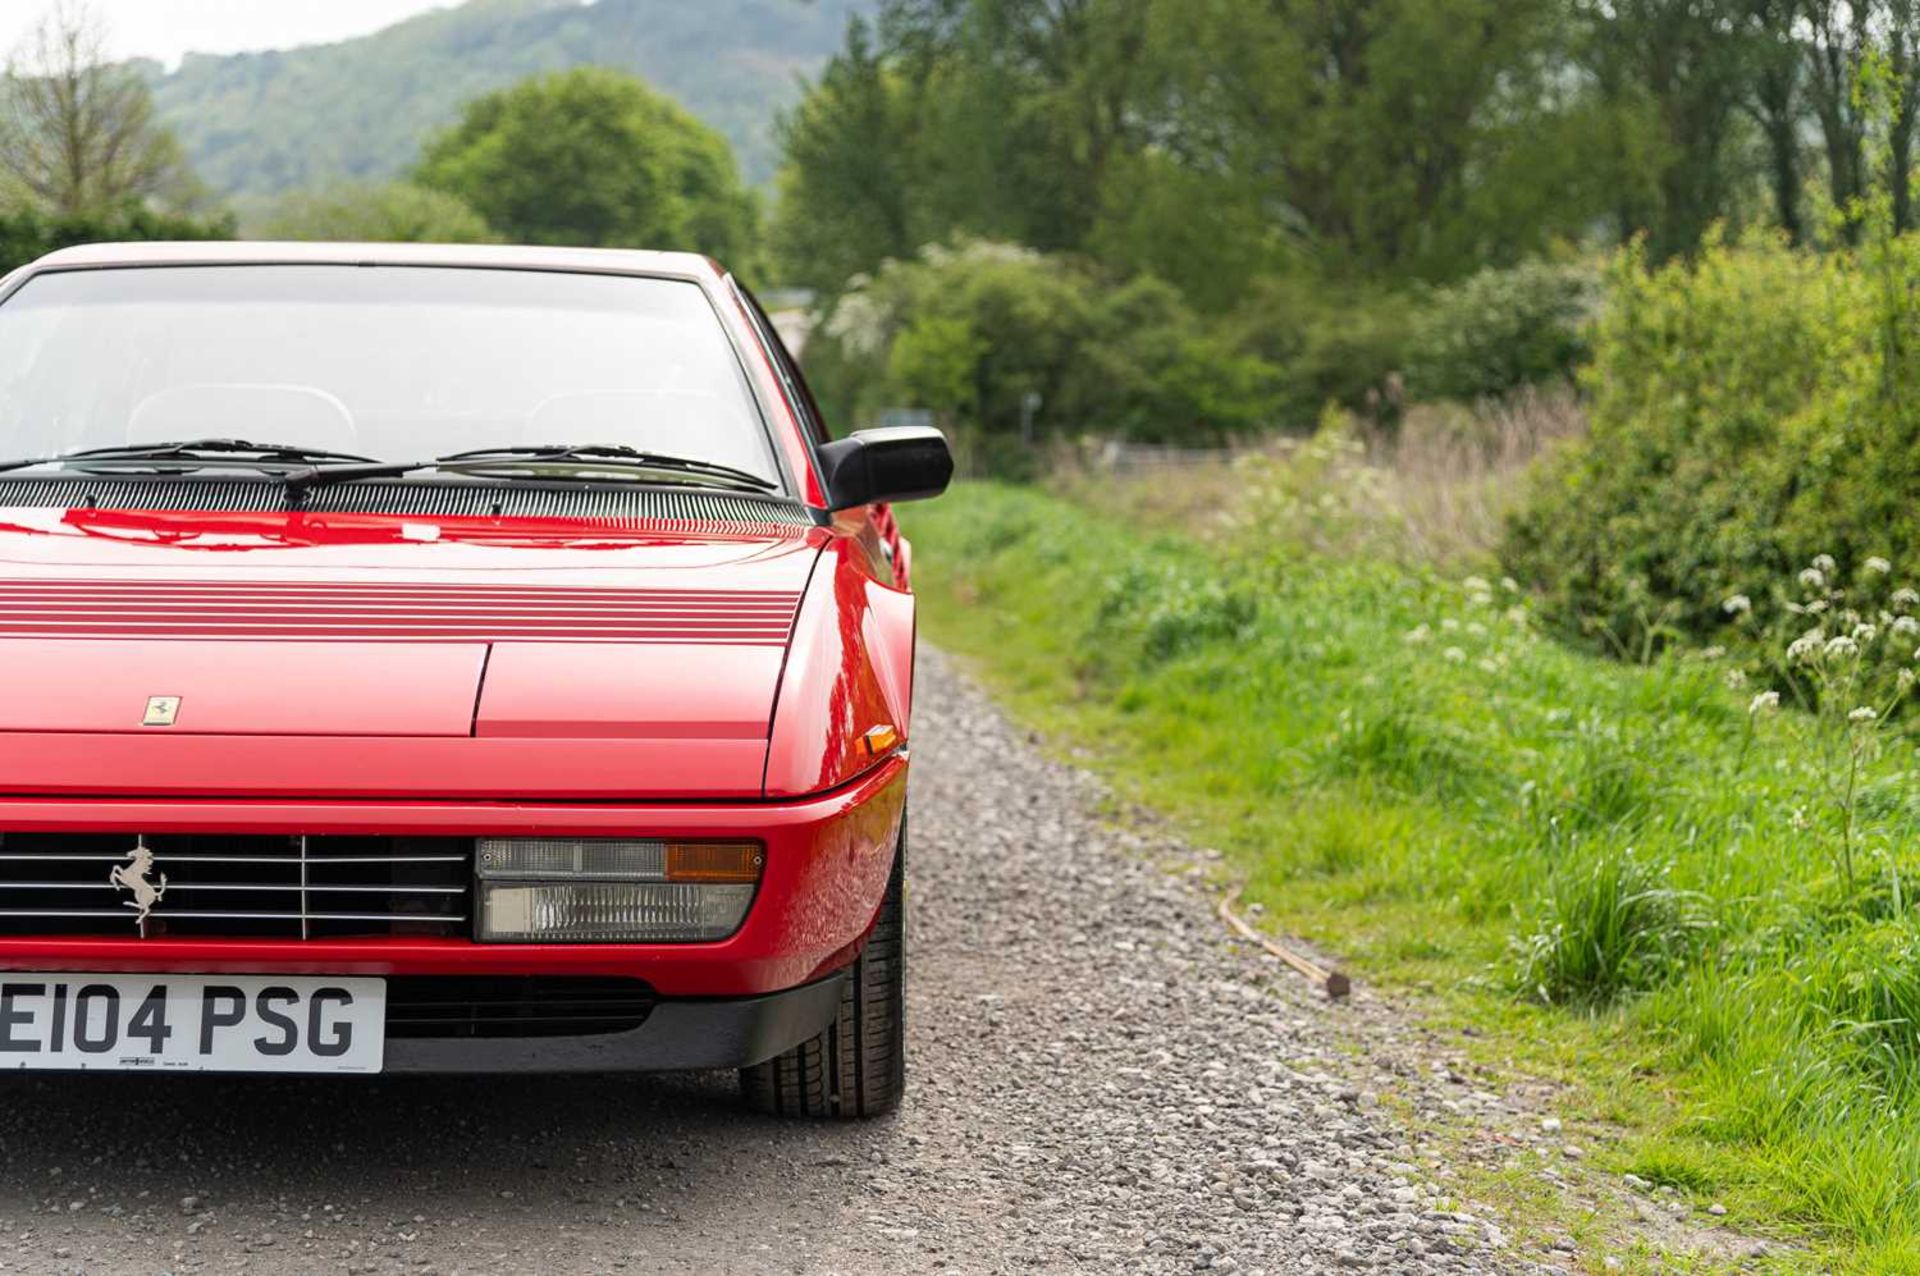 1988 Ferrari Mondial QV ***NO RESERVE*** Remained in the same ownership for nearly two decades finis - Image 18 of 91